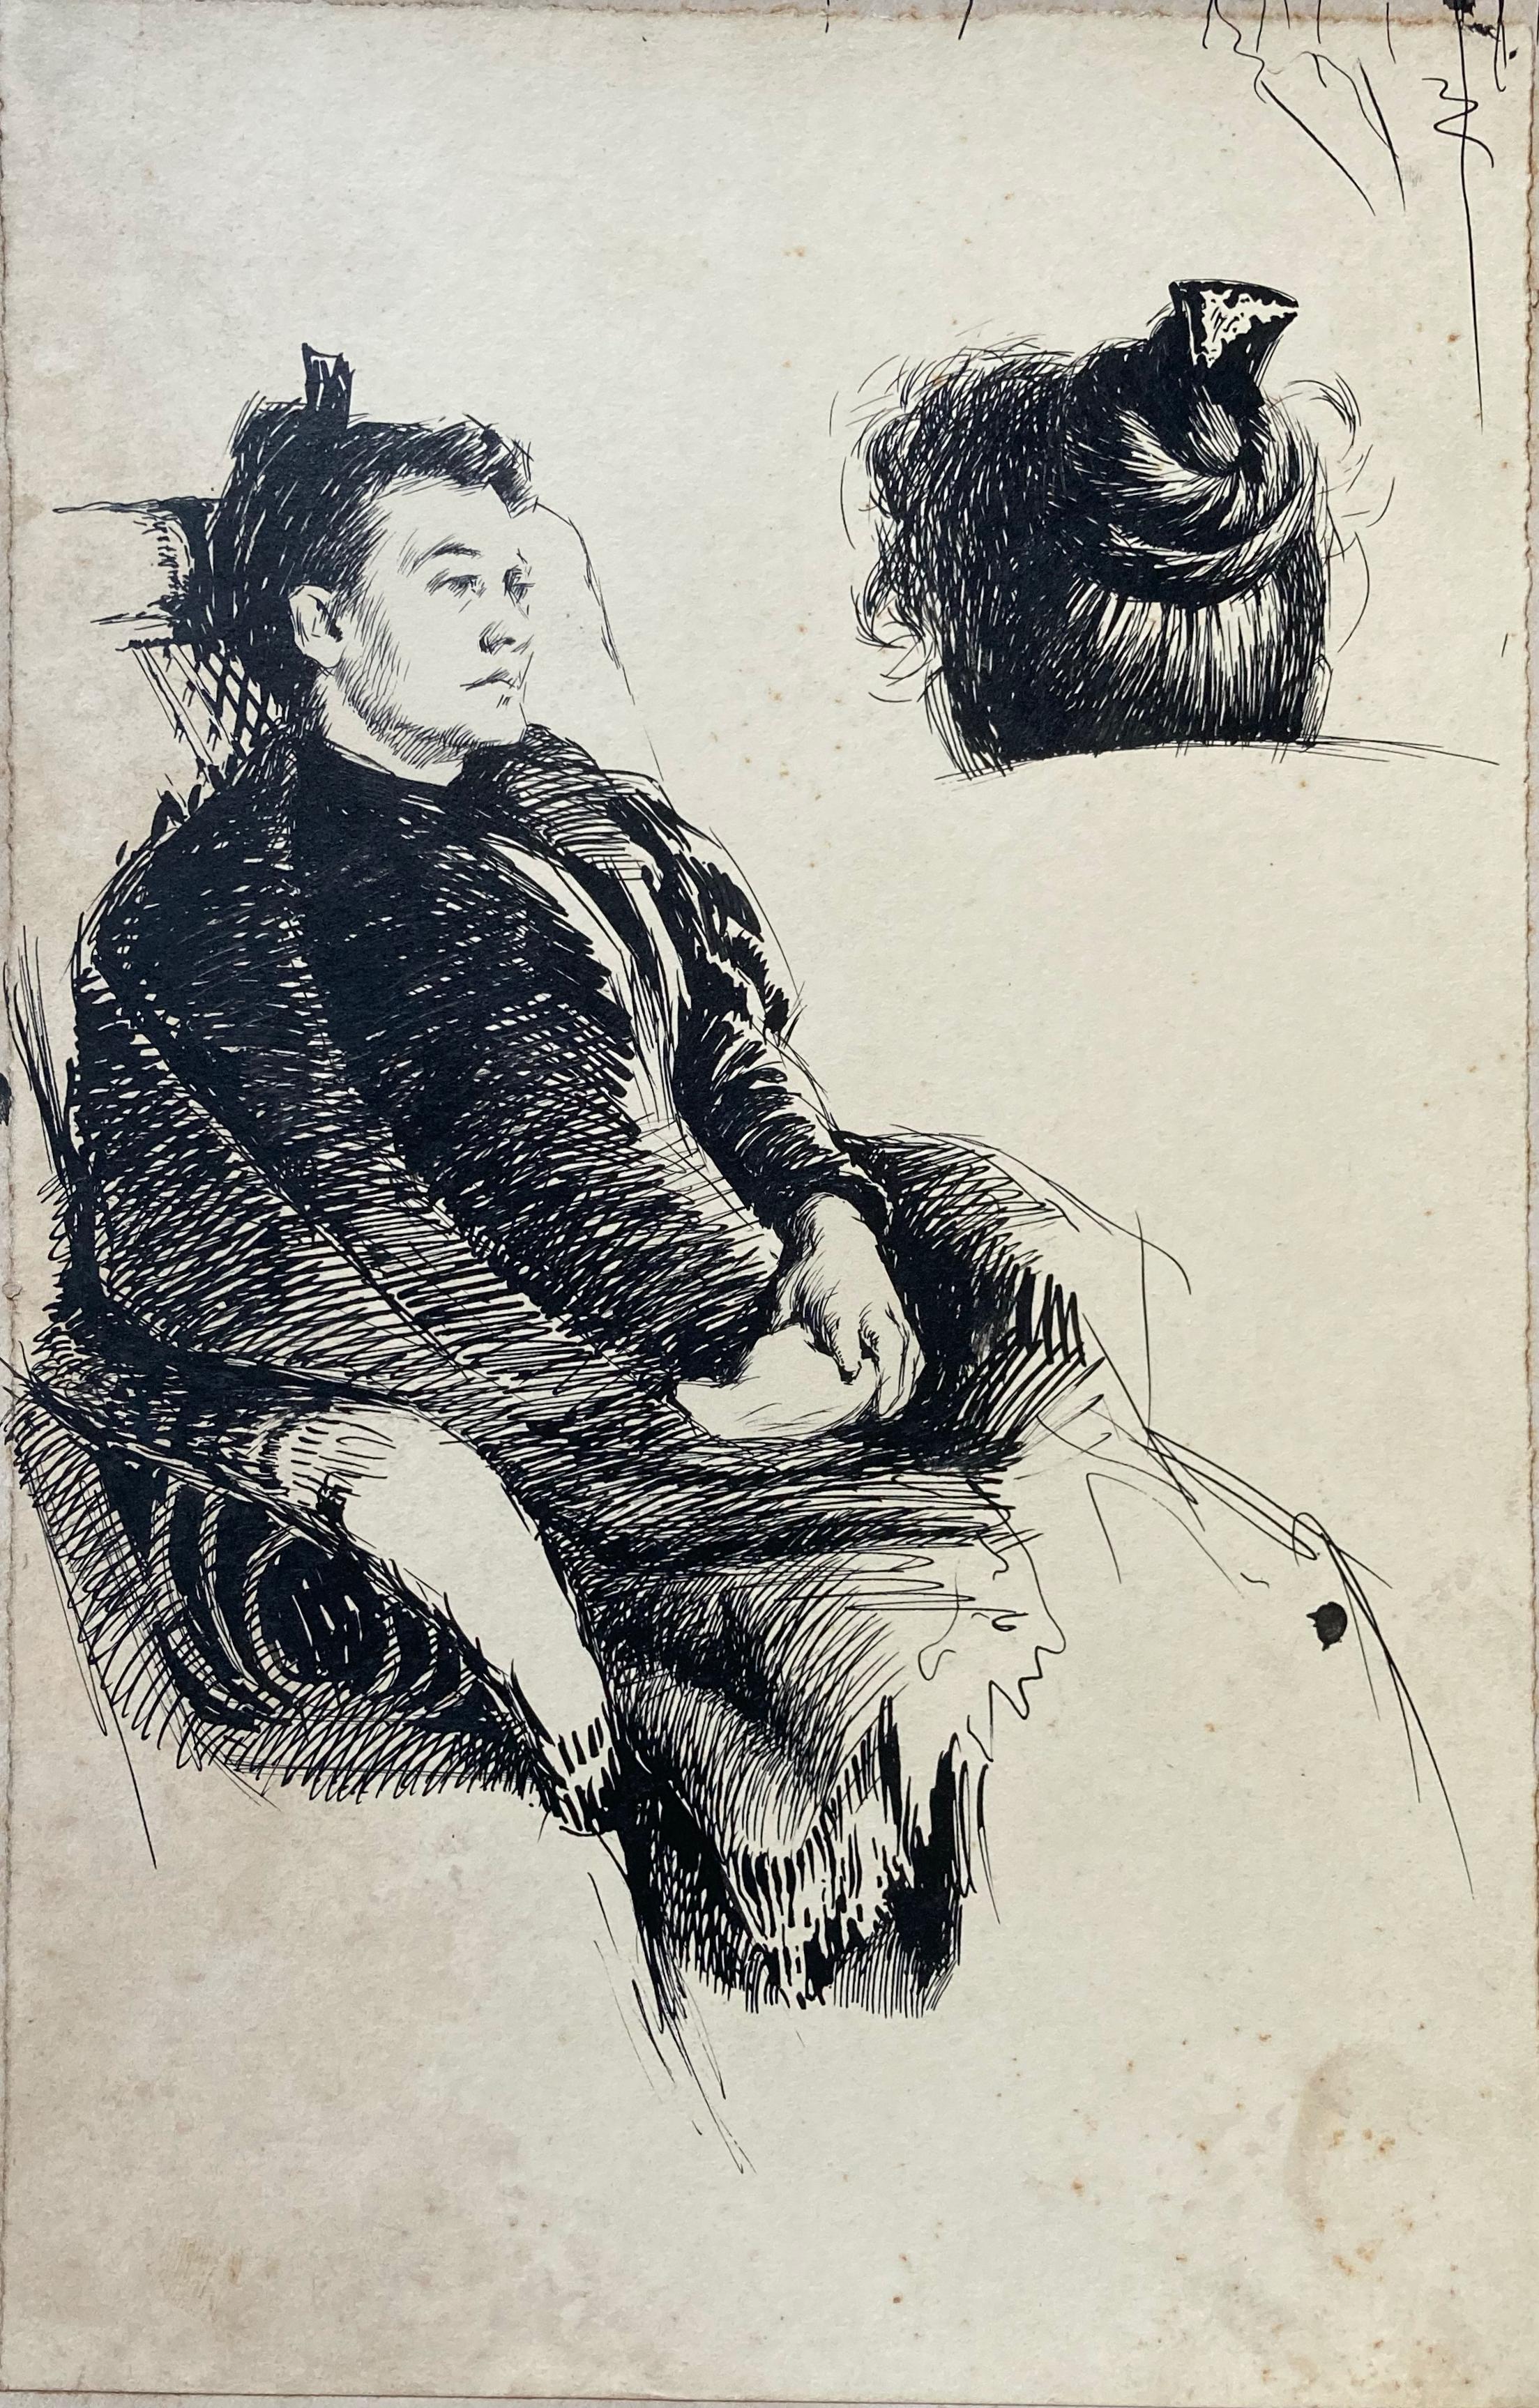 Ellsworth Woodward Portrait - Study for a Seated Woman (by leader of "Southern Art Renaissance")